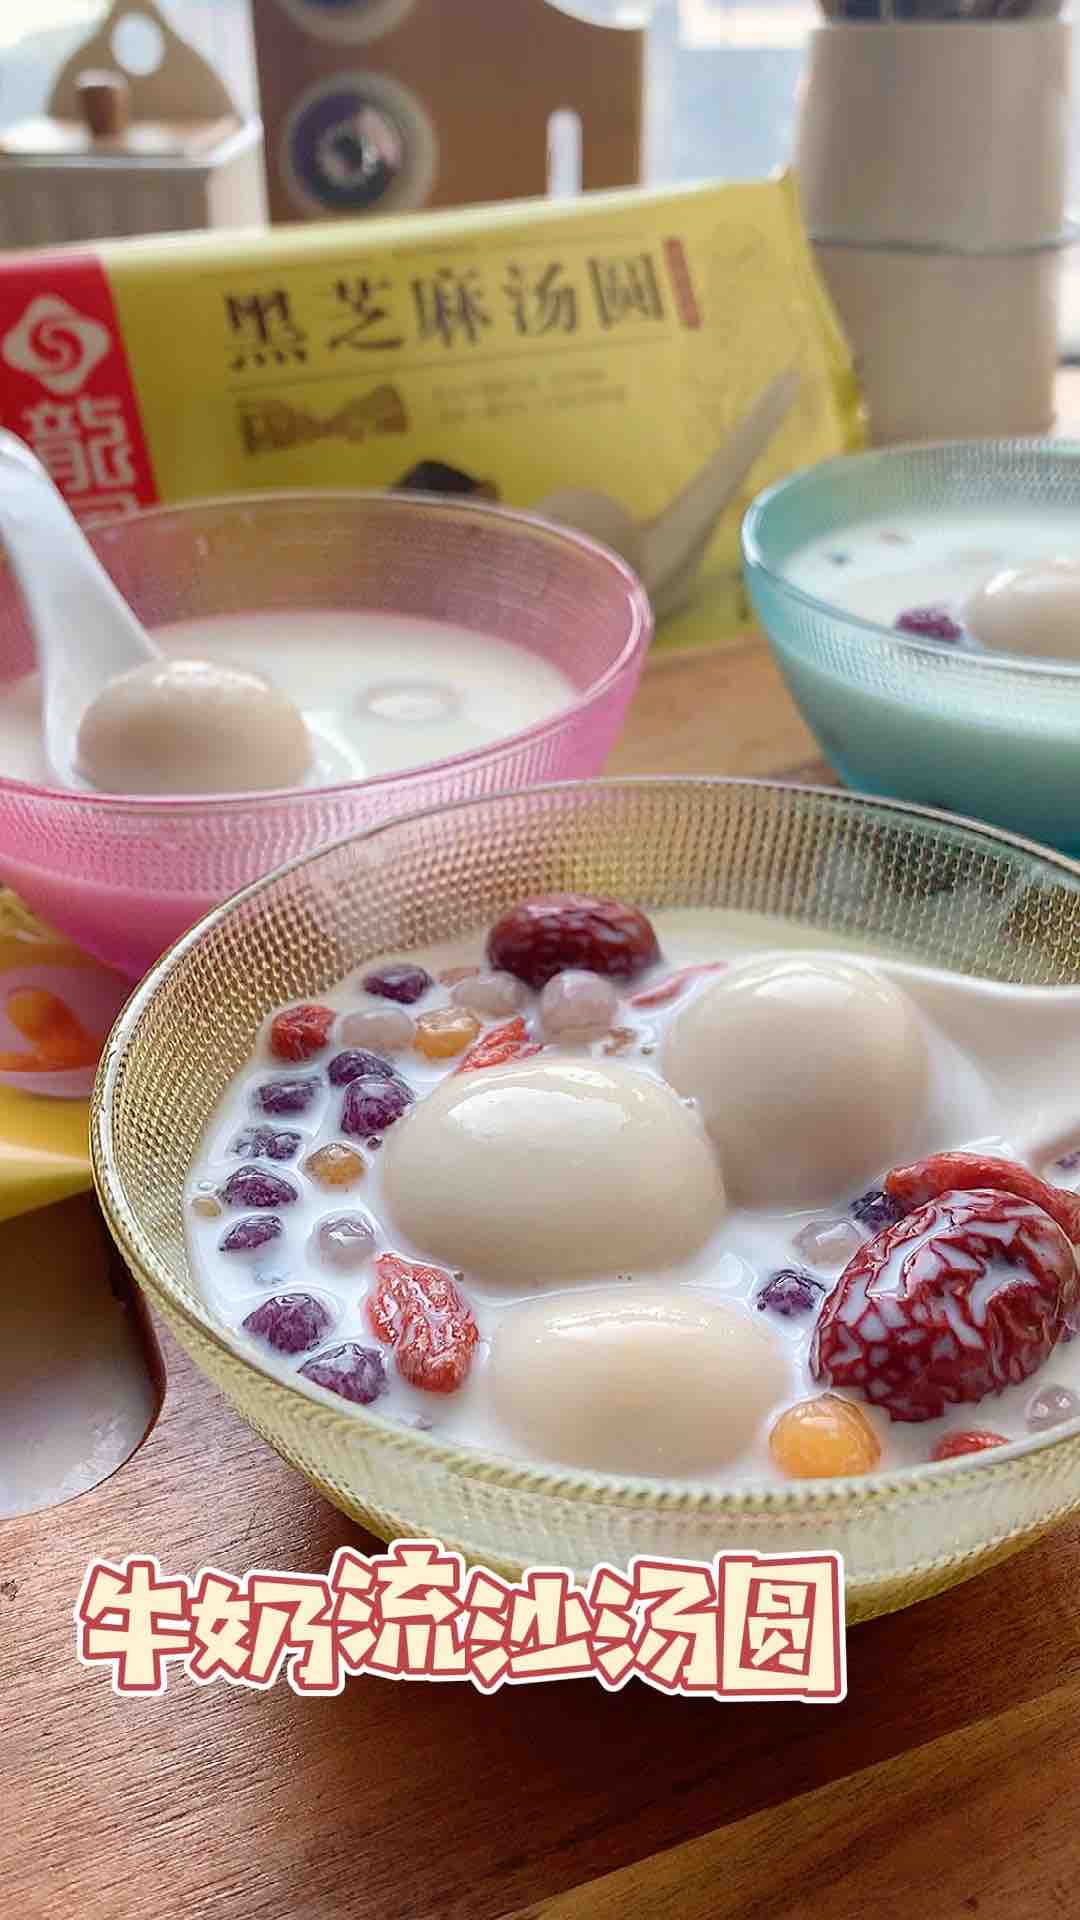 The Glutinous Rice Balls are Made Like This, and The Q Bombs are More Nutritious. recipe